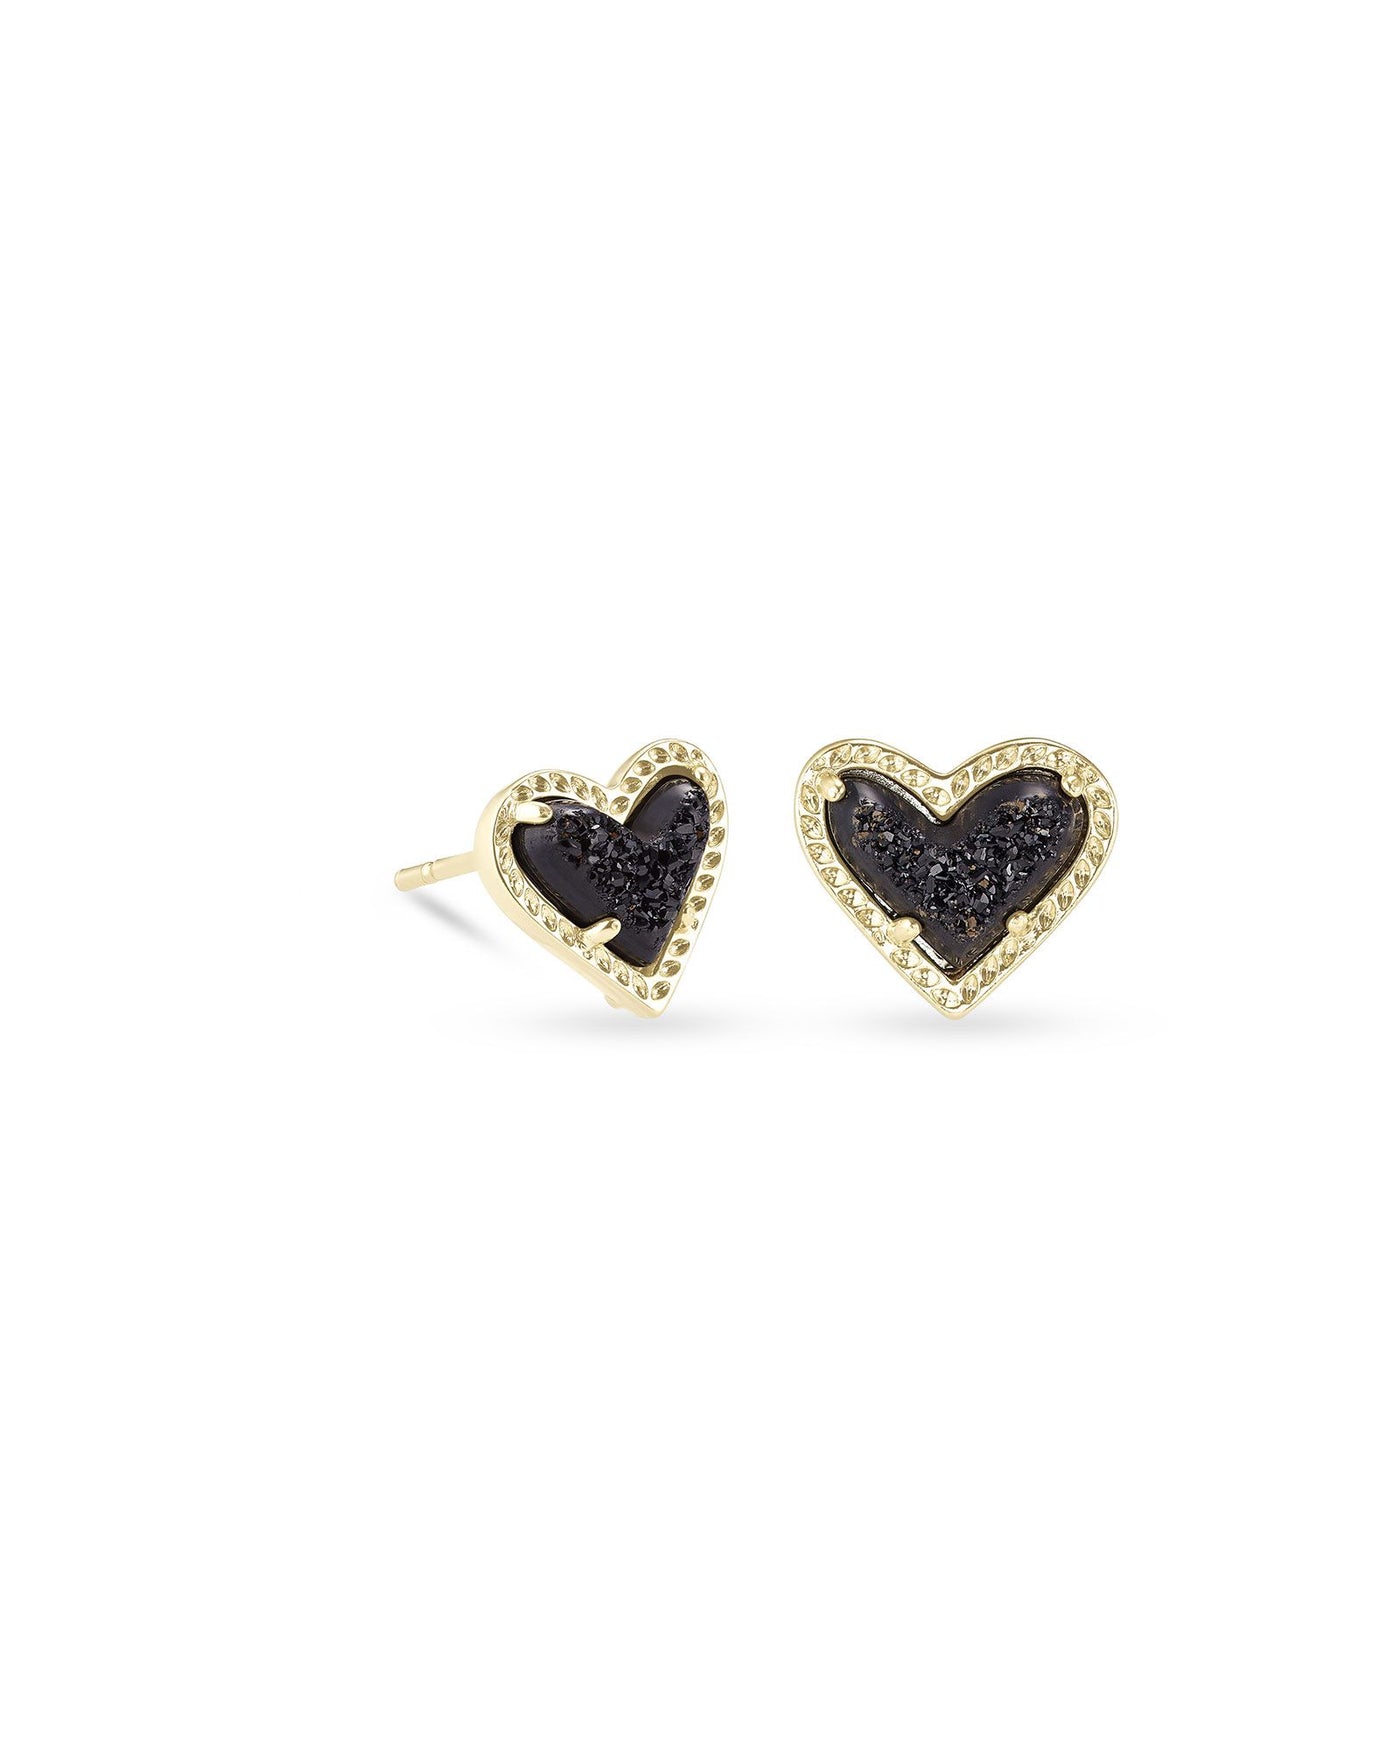 Ari Heart Stud Earrings Gold Black Drusy on white background, front view.